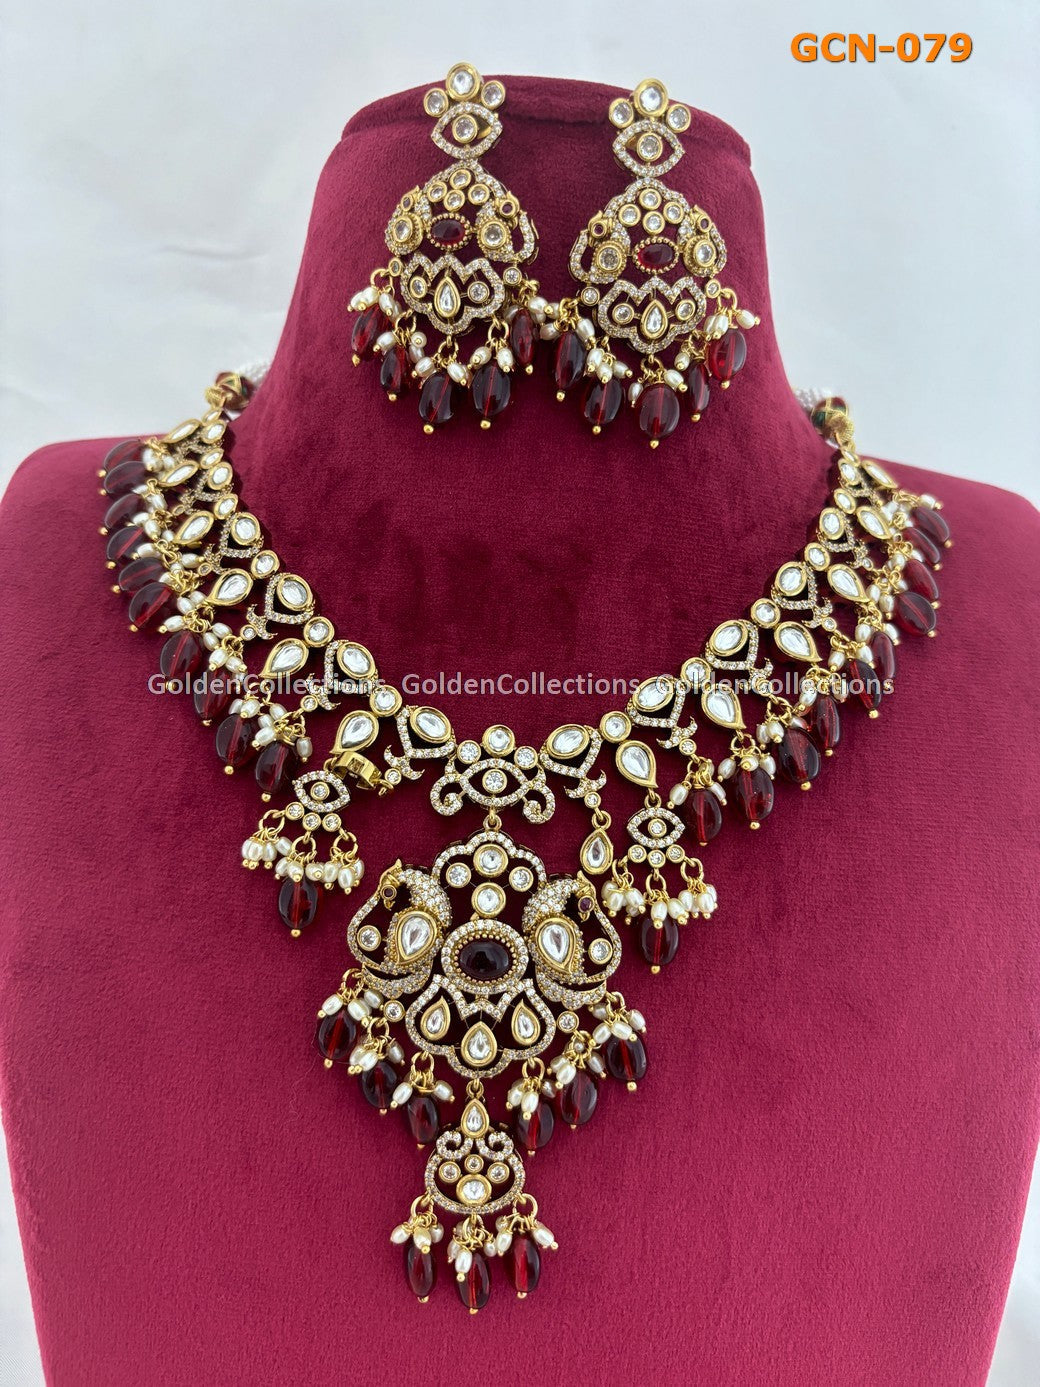 Victorian Jewelry Big Necklaces : New Fashion Necklace Gold GoldenCollections 